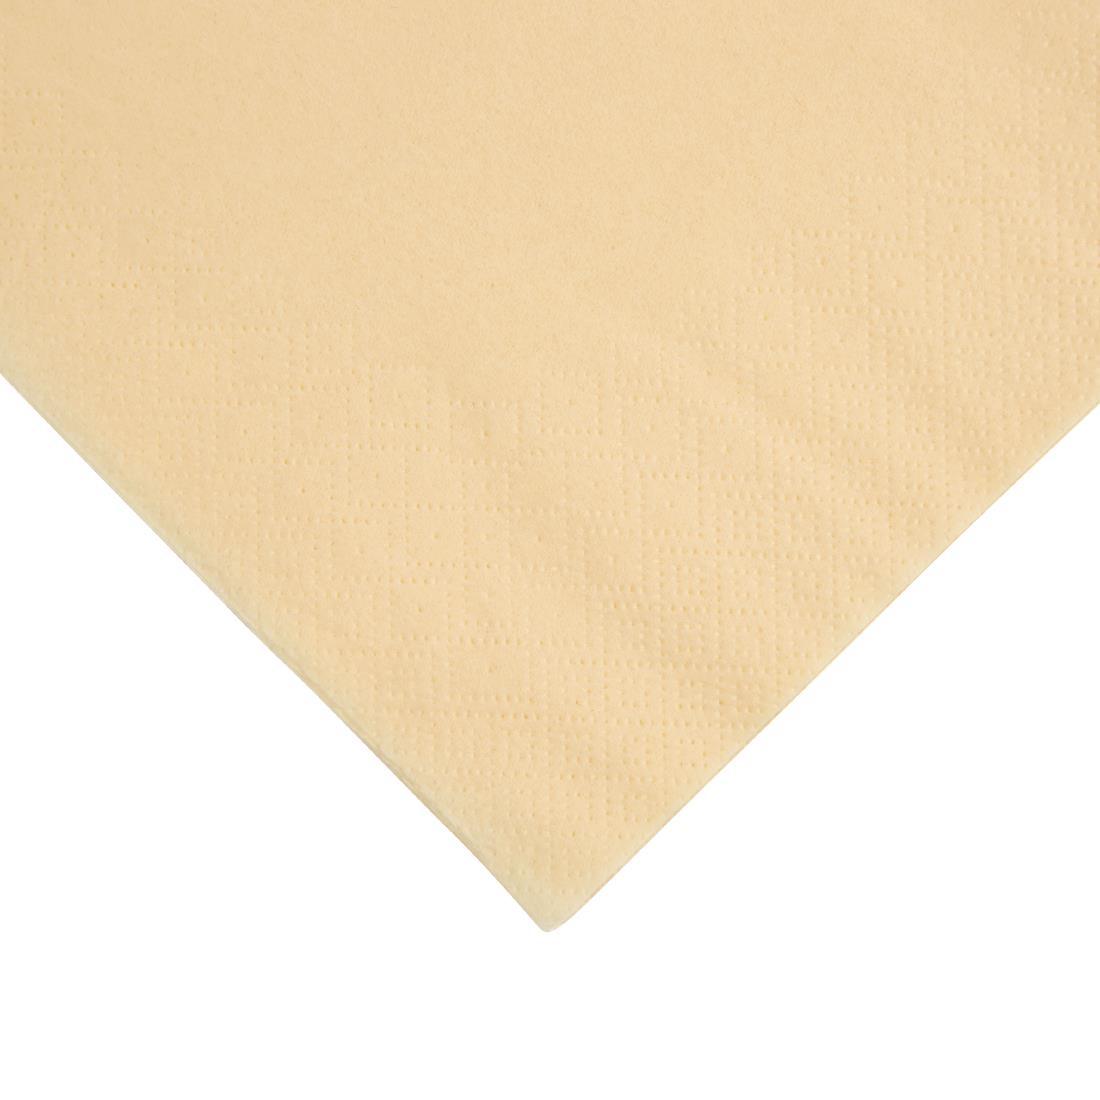 Fiesta Recyclable Dinner Napkin Cream 40x40cm 3ply 1/4 Fold (Pack of 1000) - FE252  - 2